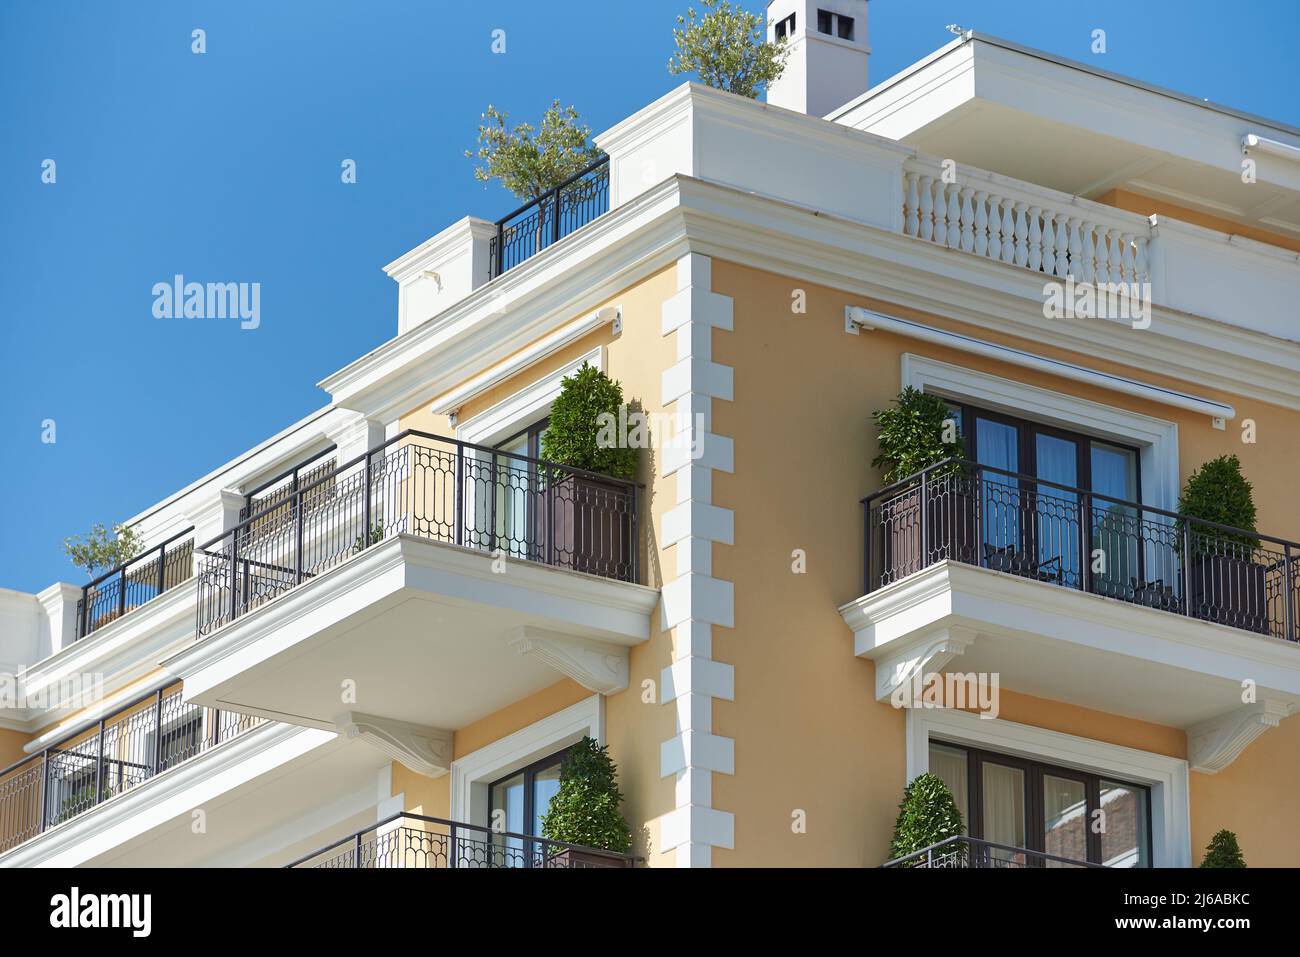 Luxury apartment building with balconies and green plants Stock Photo